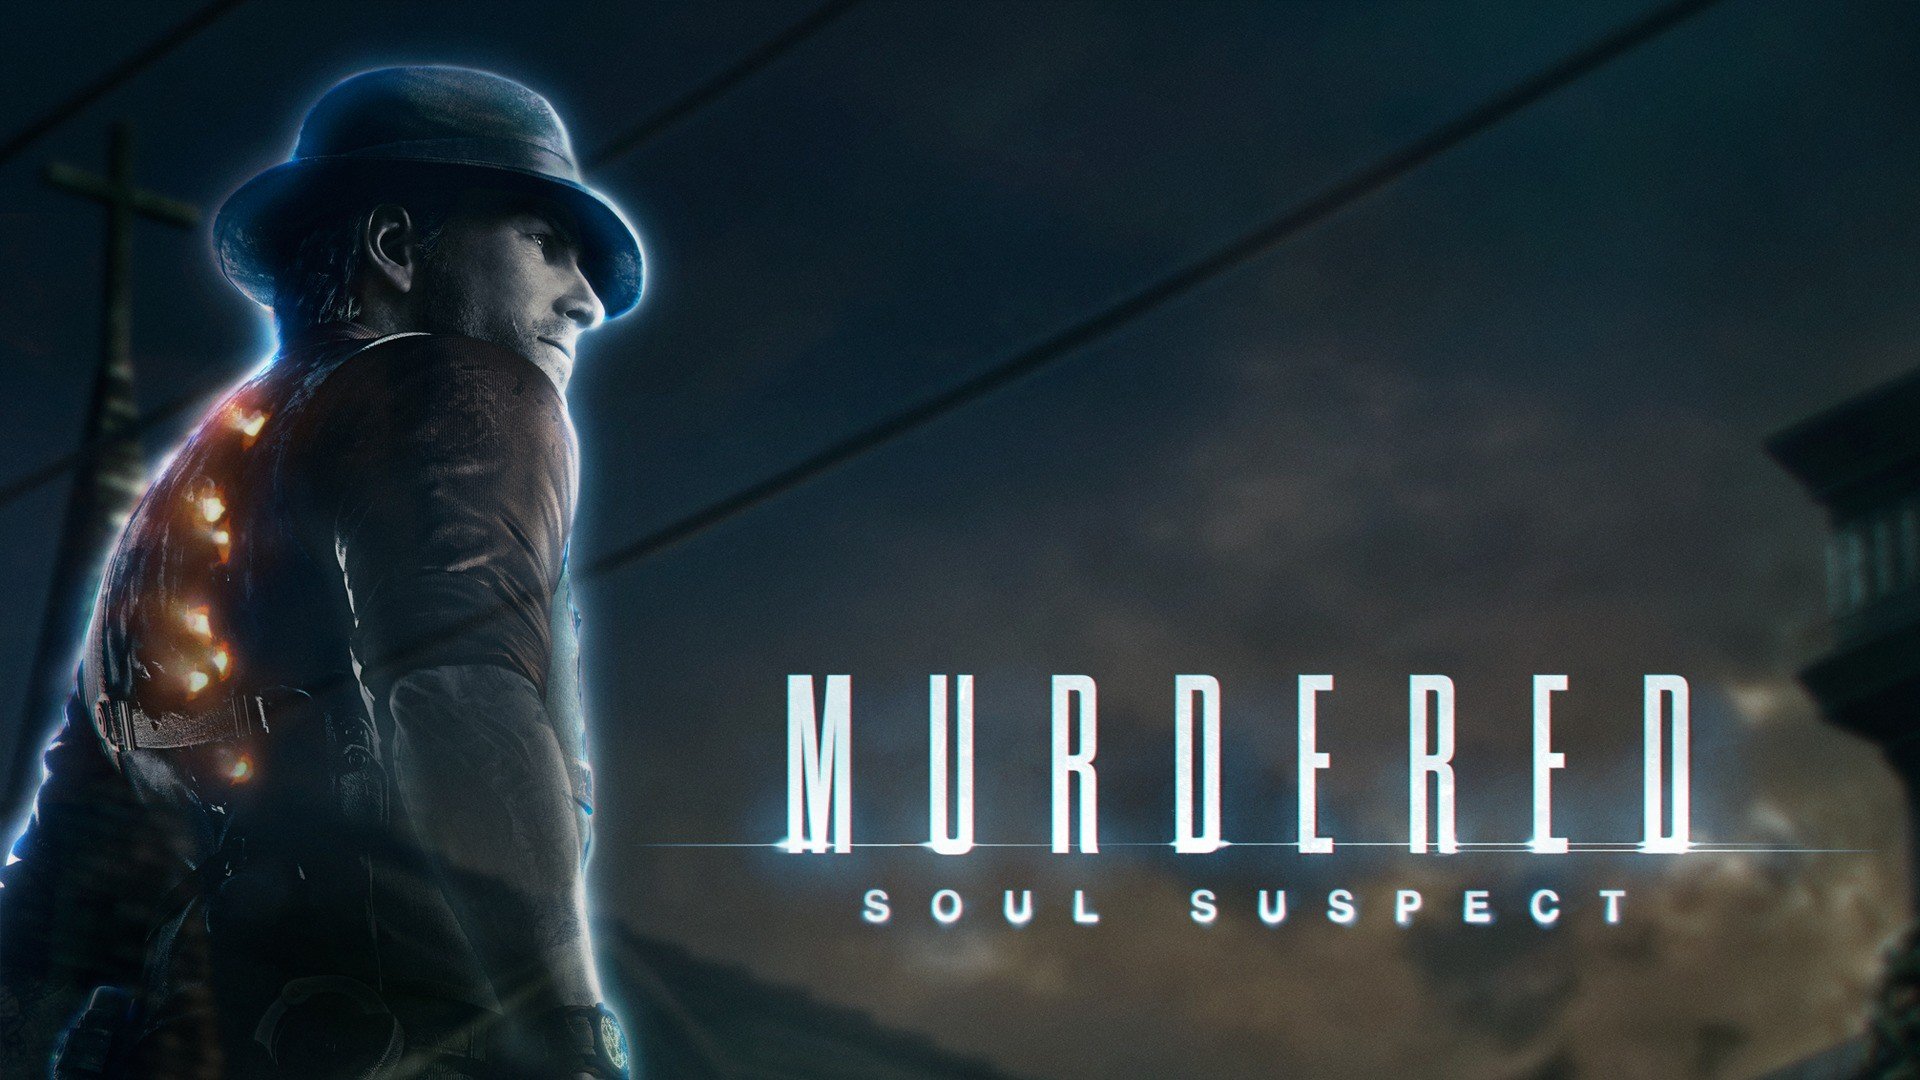 murdered soul suspect ign download free